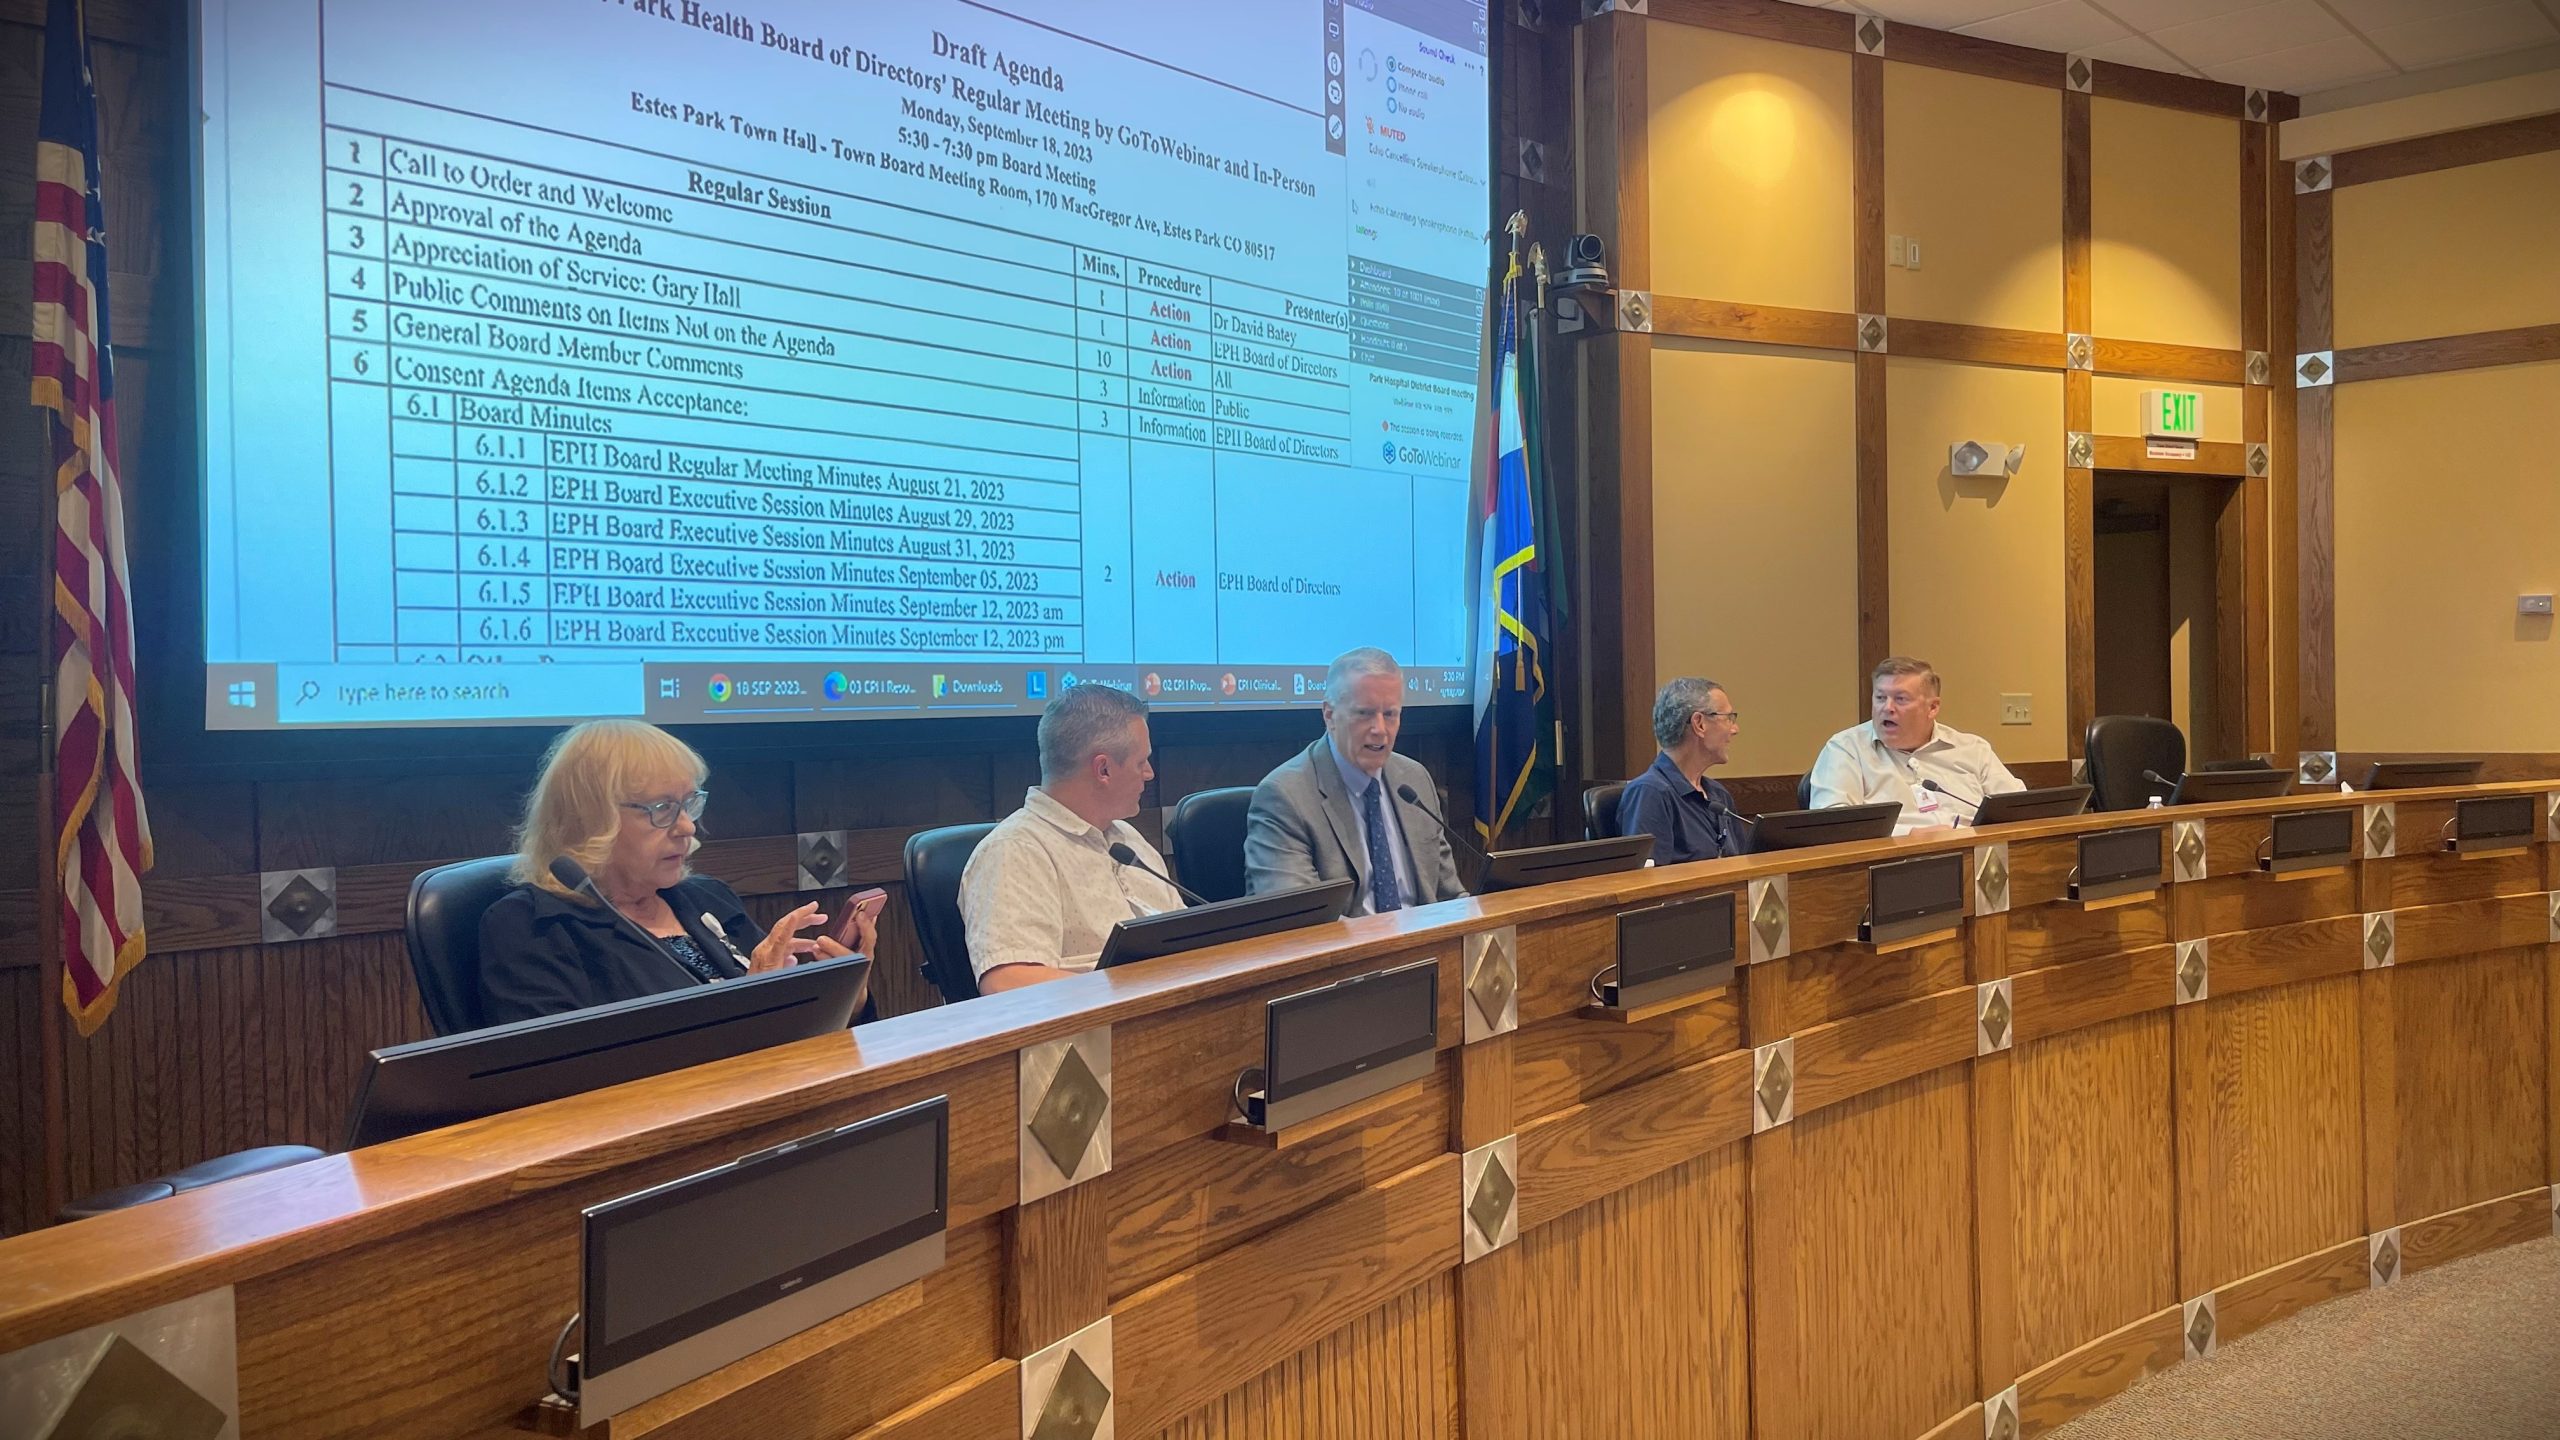 A group of officials seated at a long wooden desk in a meeting room. Projected on the screen behind them is an agenda for the Elko County Commission meeting.